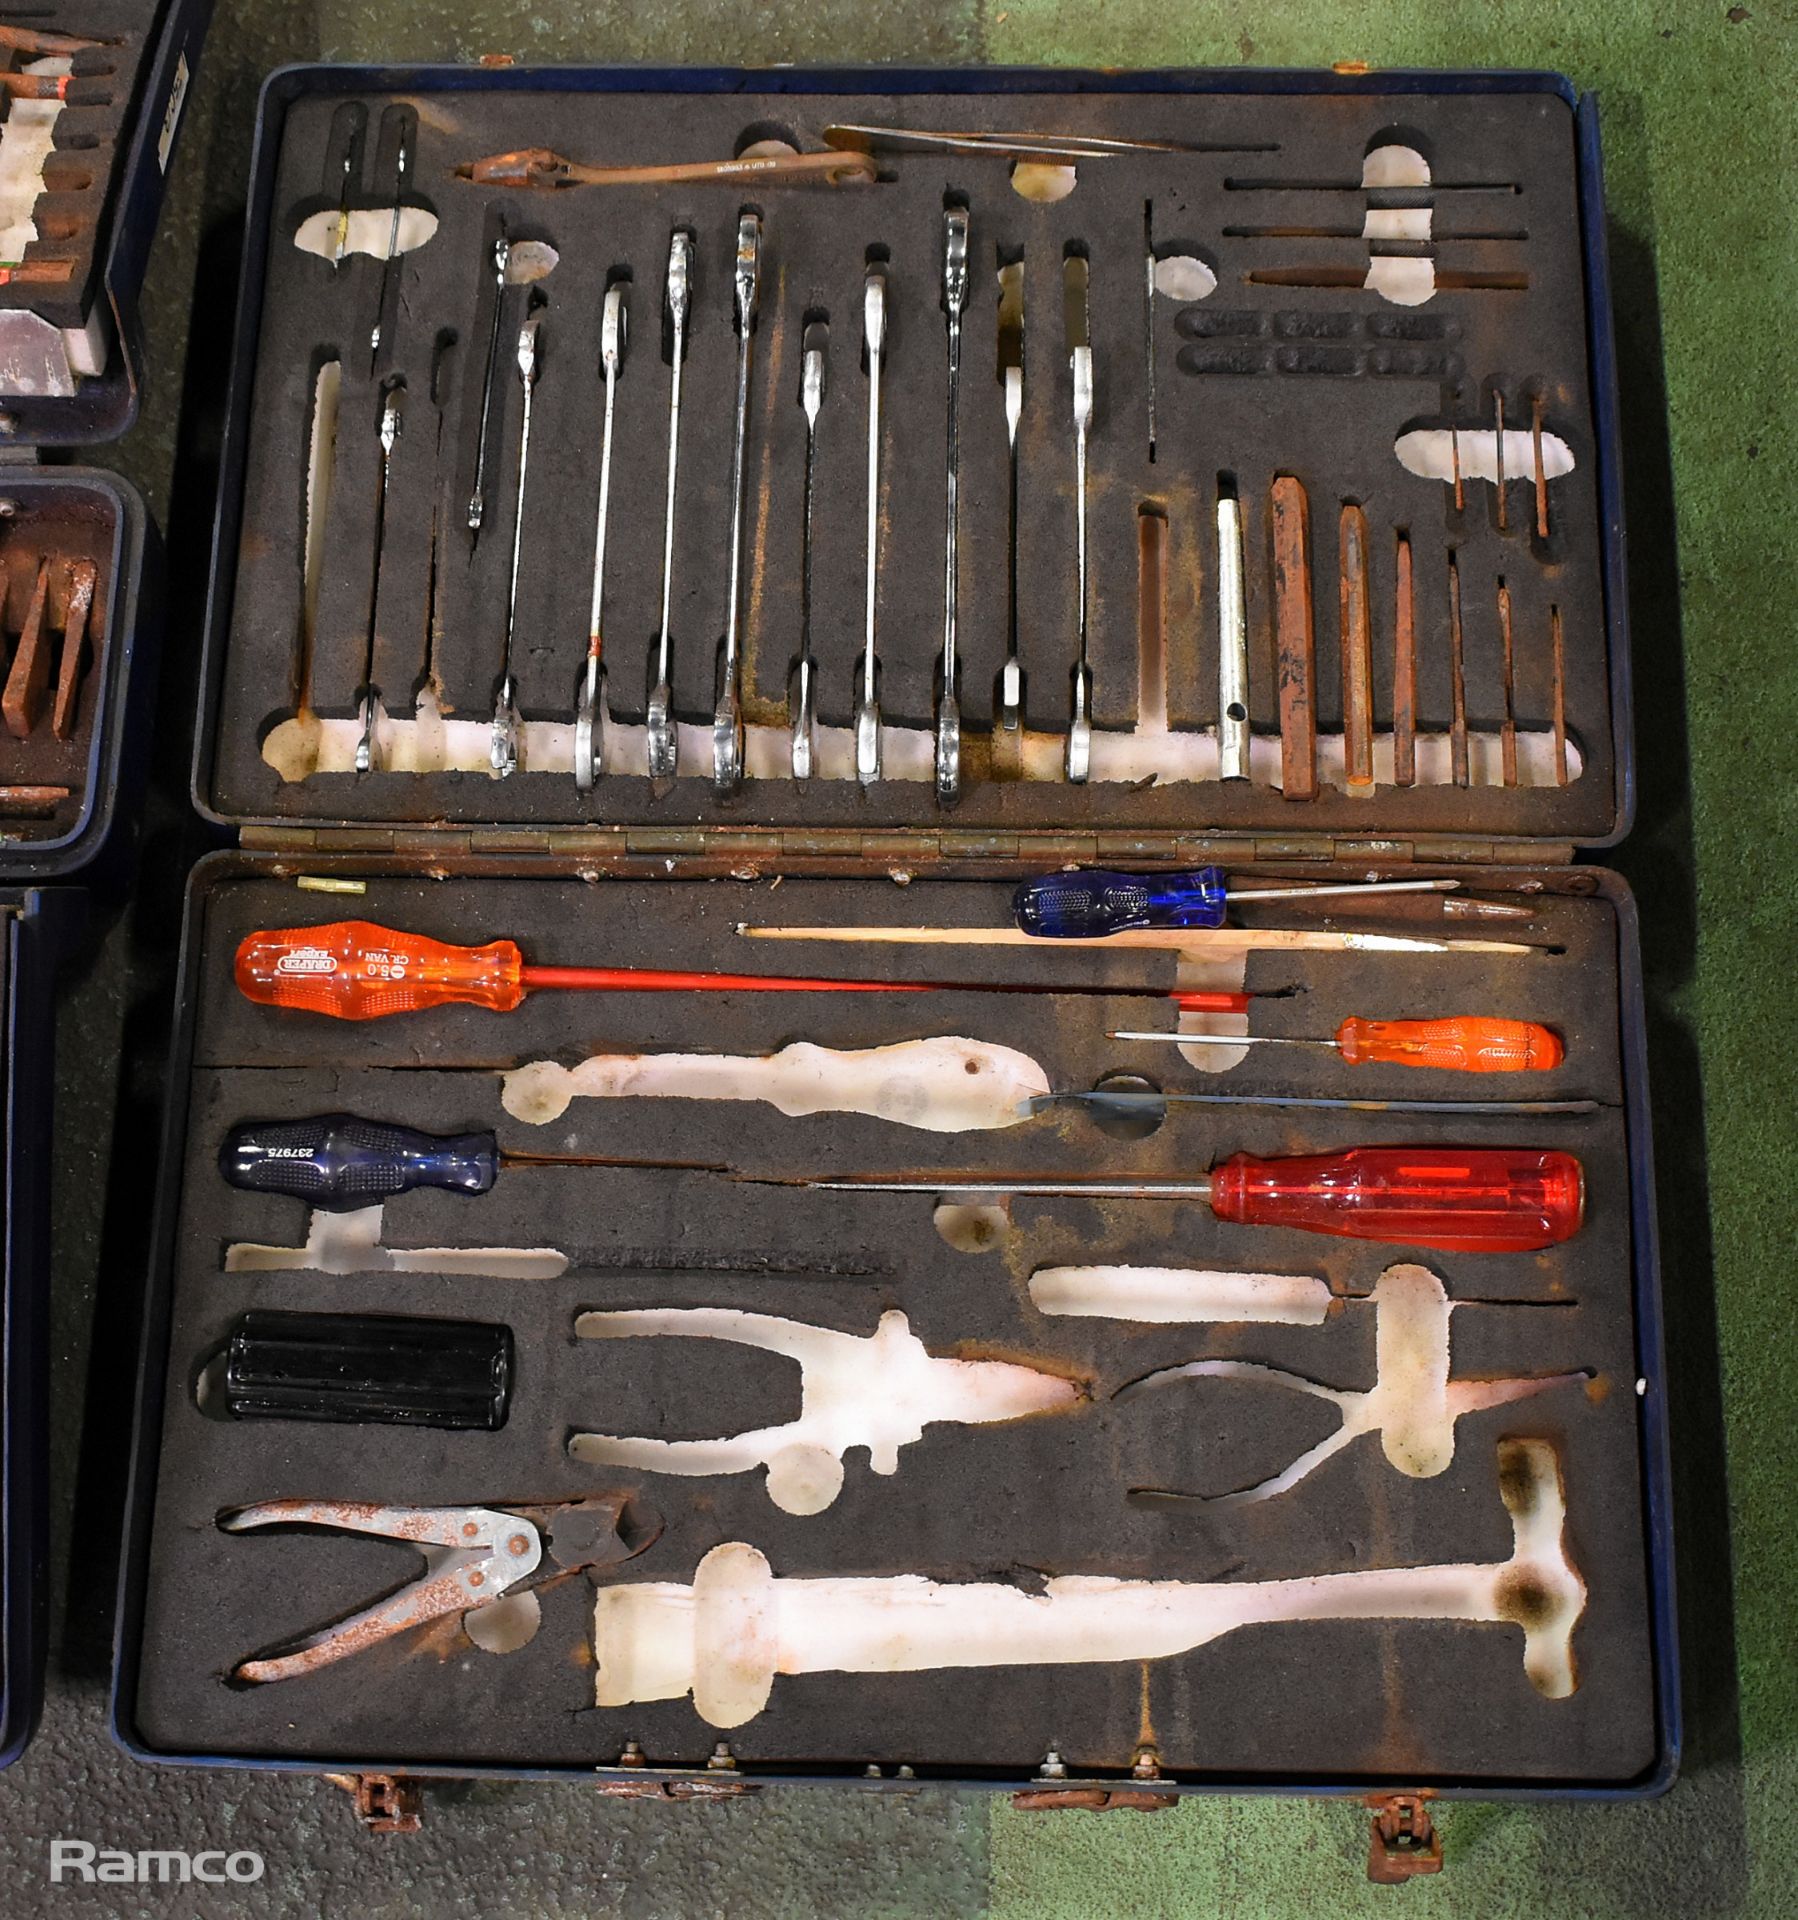 3x Multi piece tool kits in composite case - spanners, screwdrivers, hammer and punches - Image 5 of 7